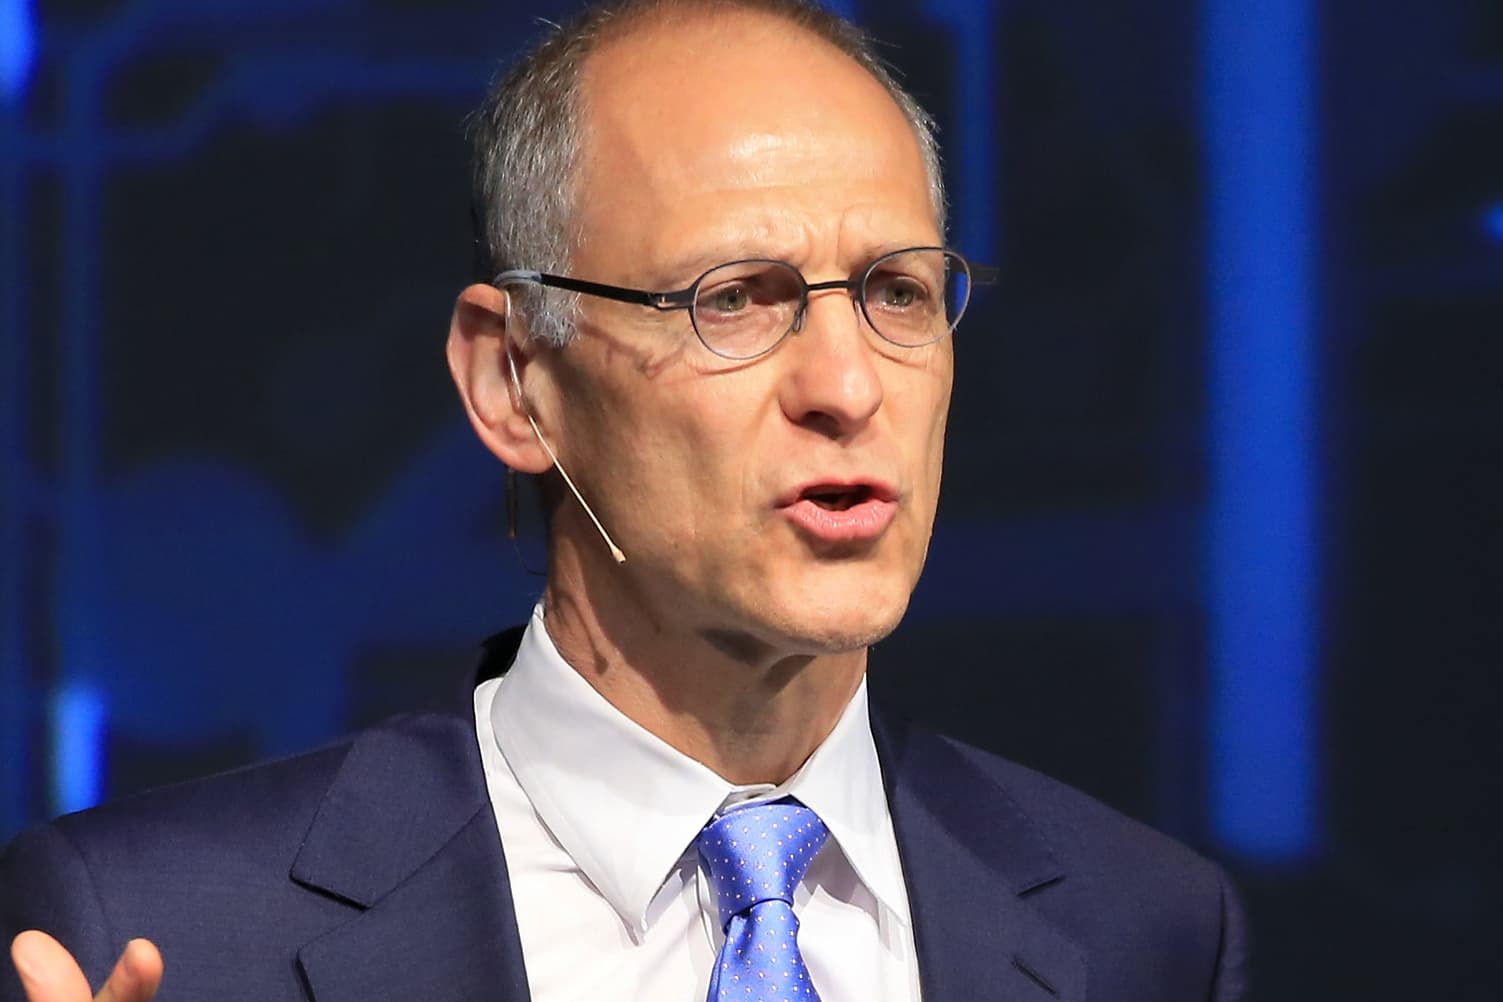 Dr. Ezekiel Emanuel says Covid is ‘far’ from dying out in U.S.